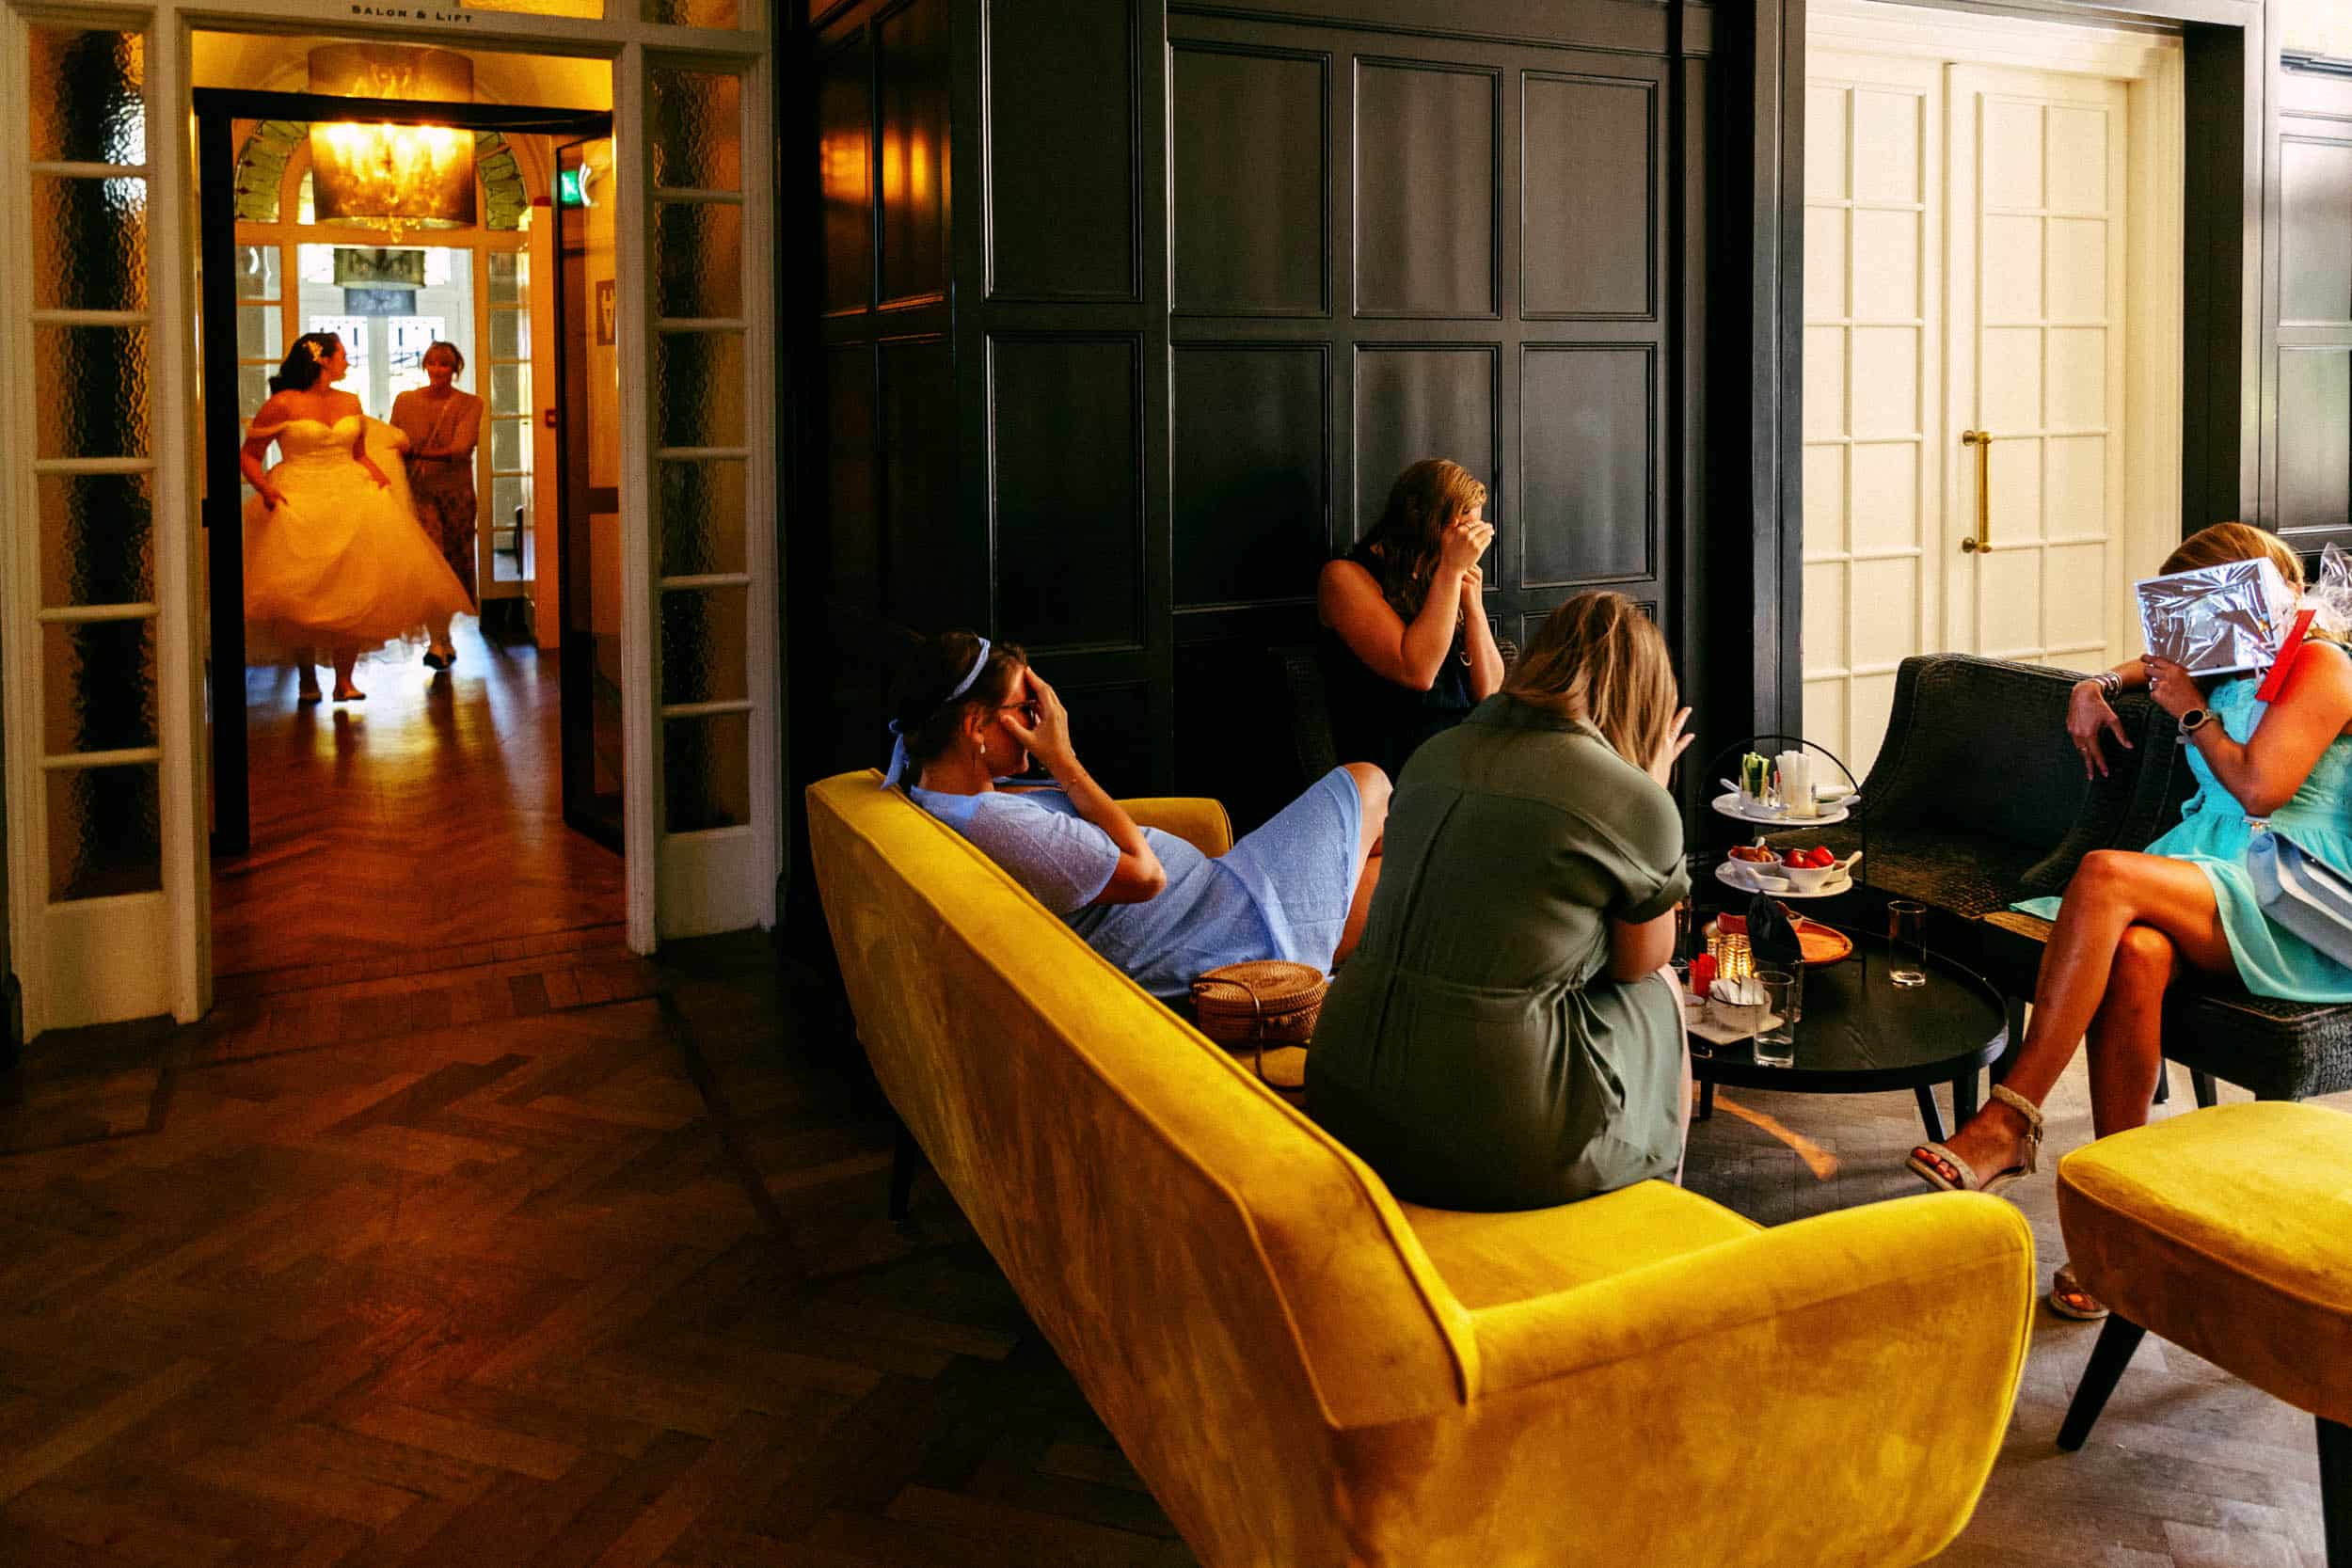 A group of people sit on yellow couches in a room.